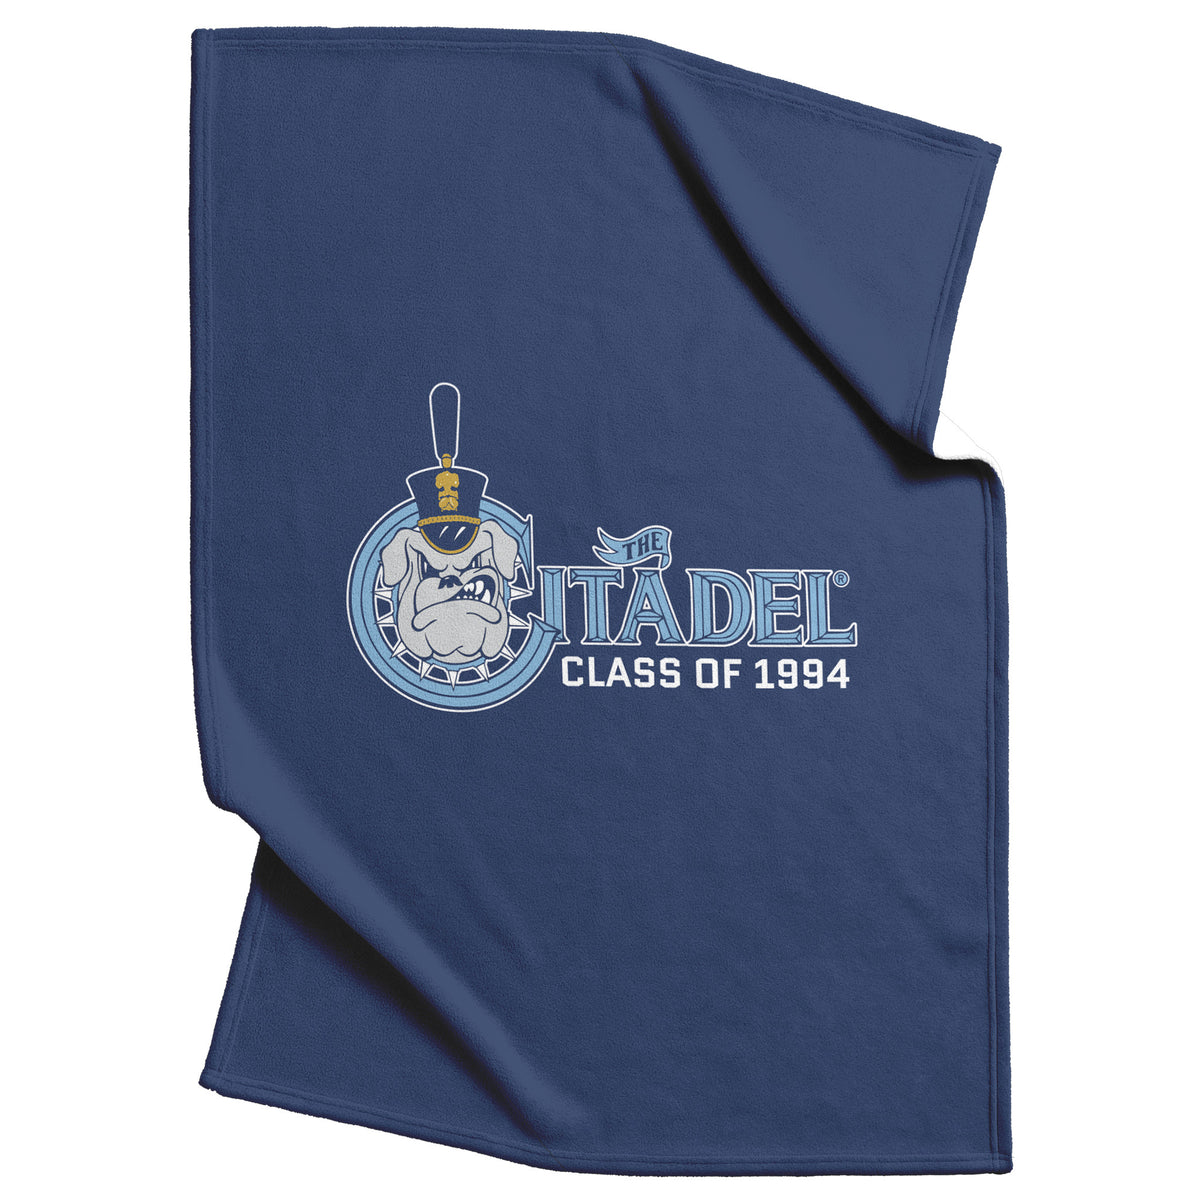 The Citadel Spike, Class of 1994 Blanket